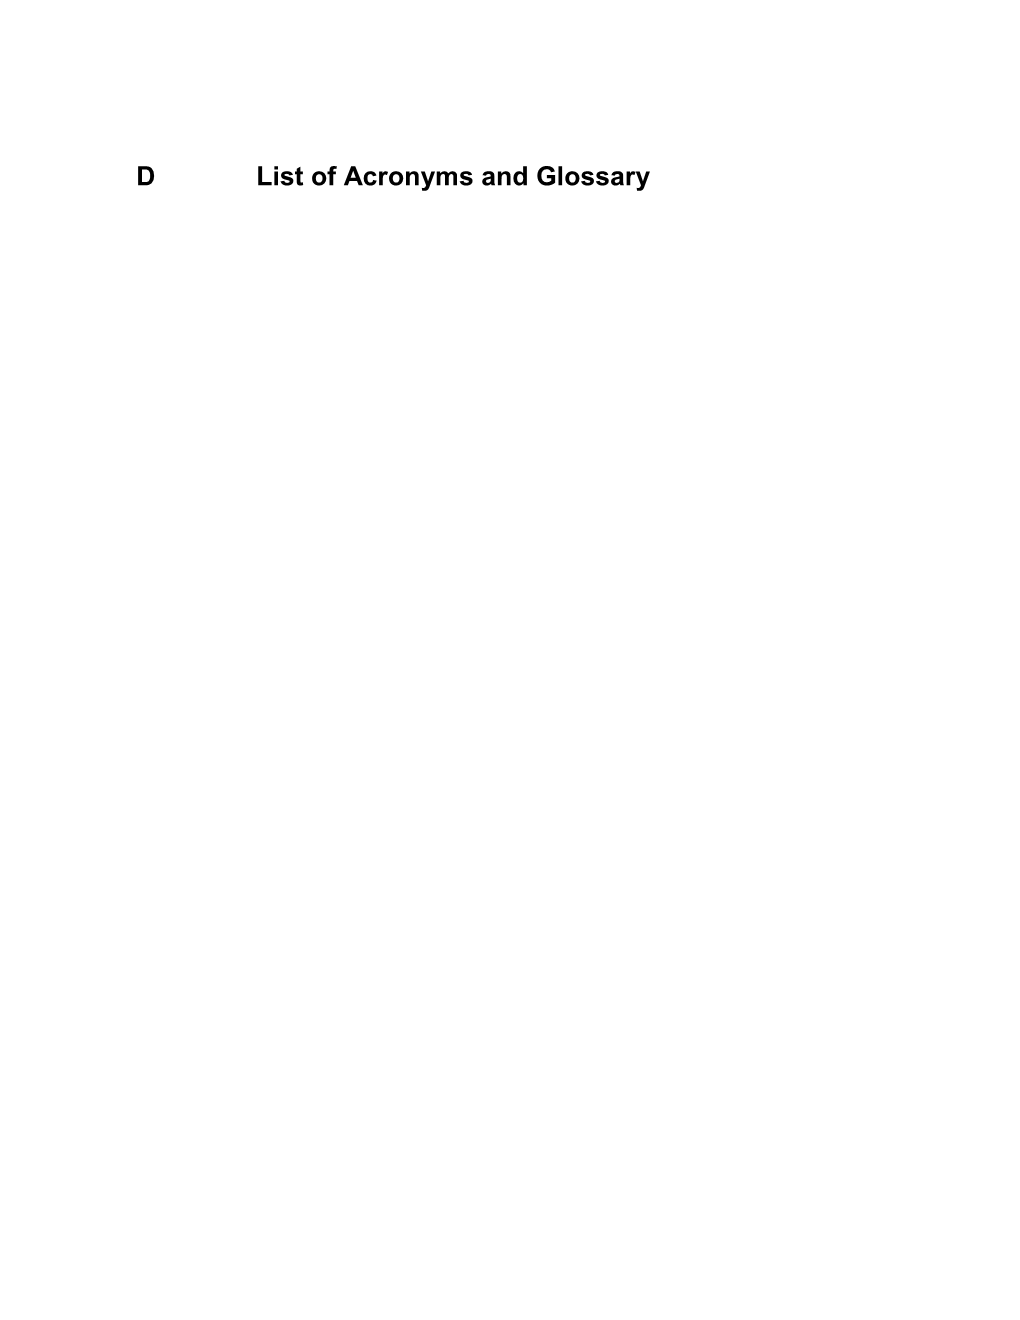 Appendix D – List of Acronyms and Glossary